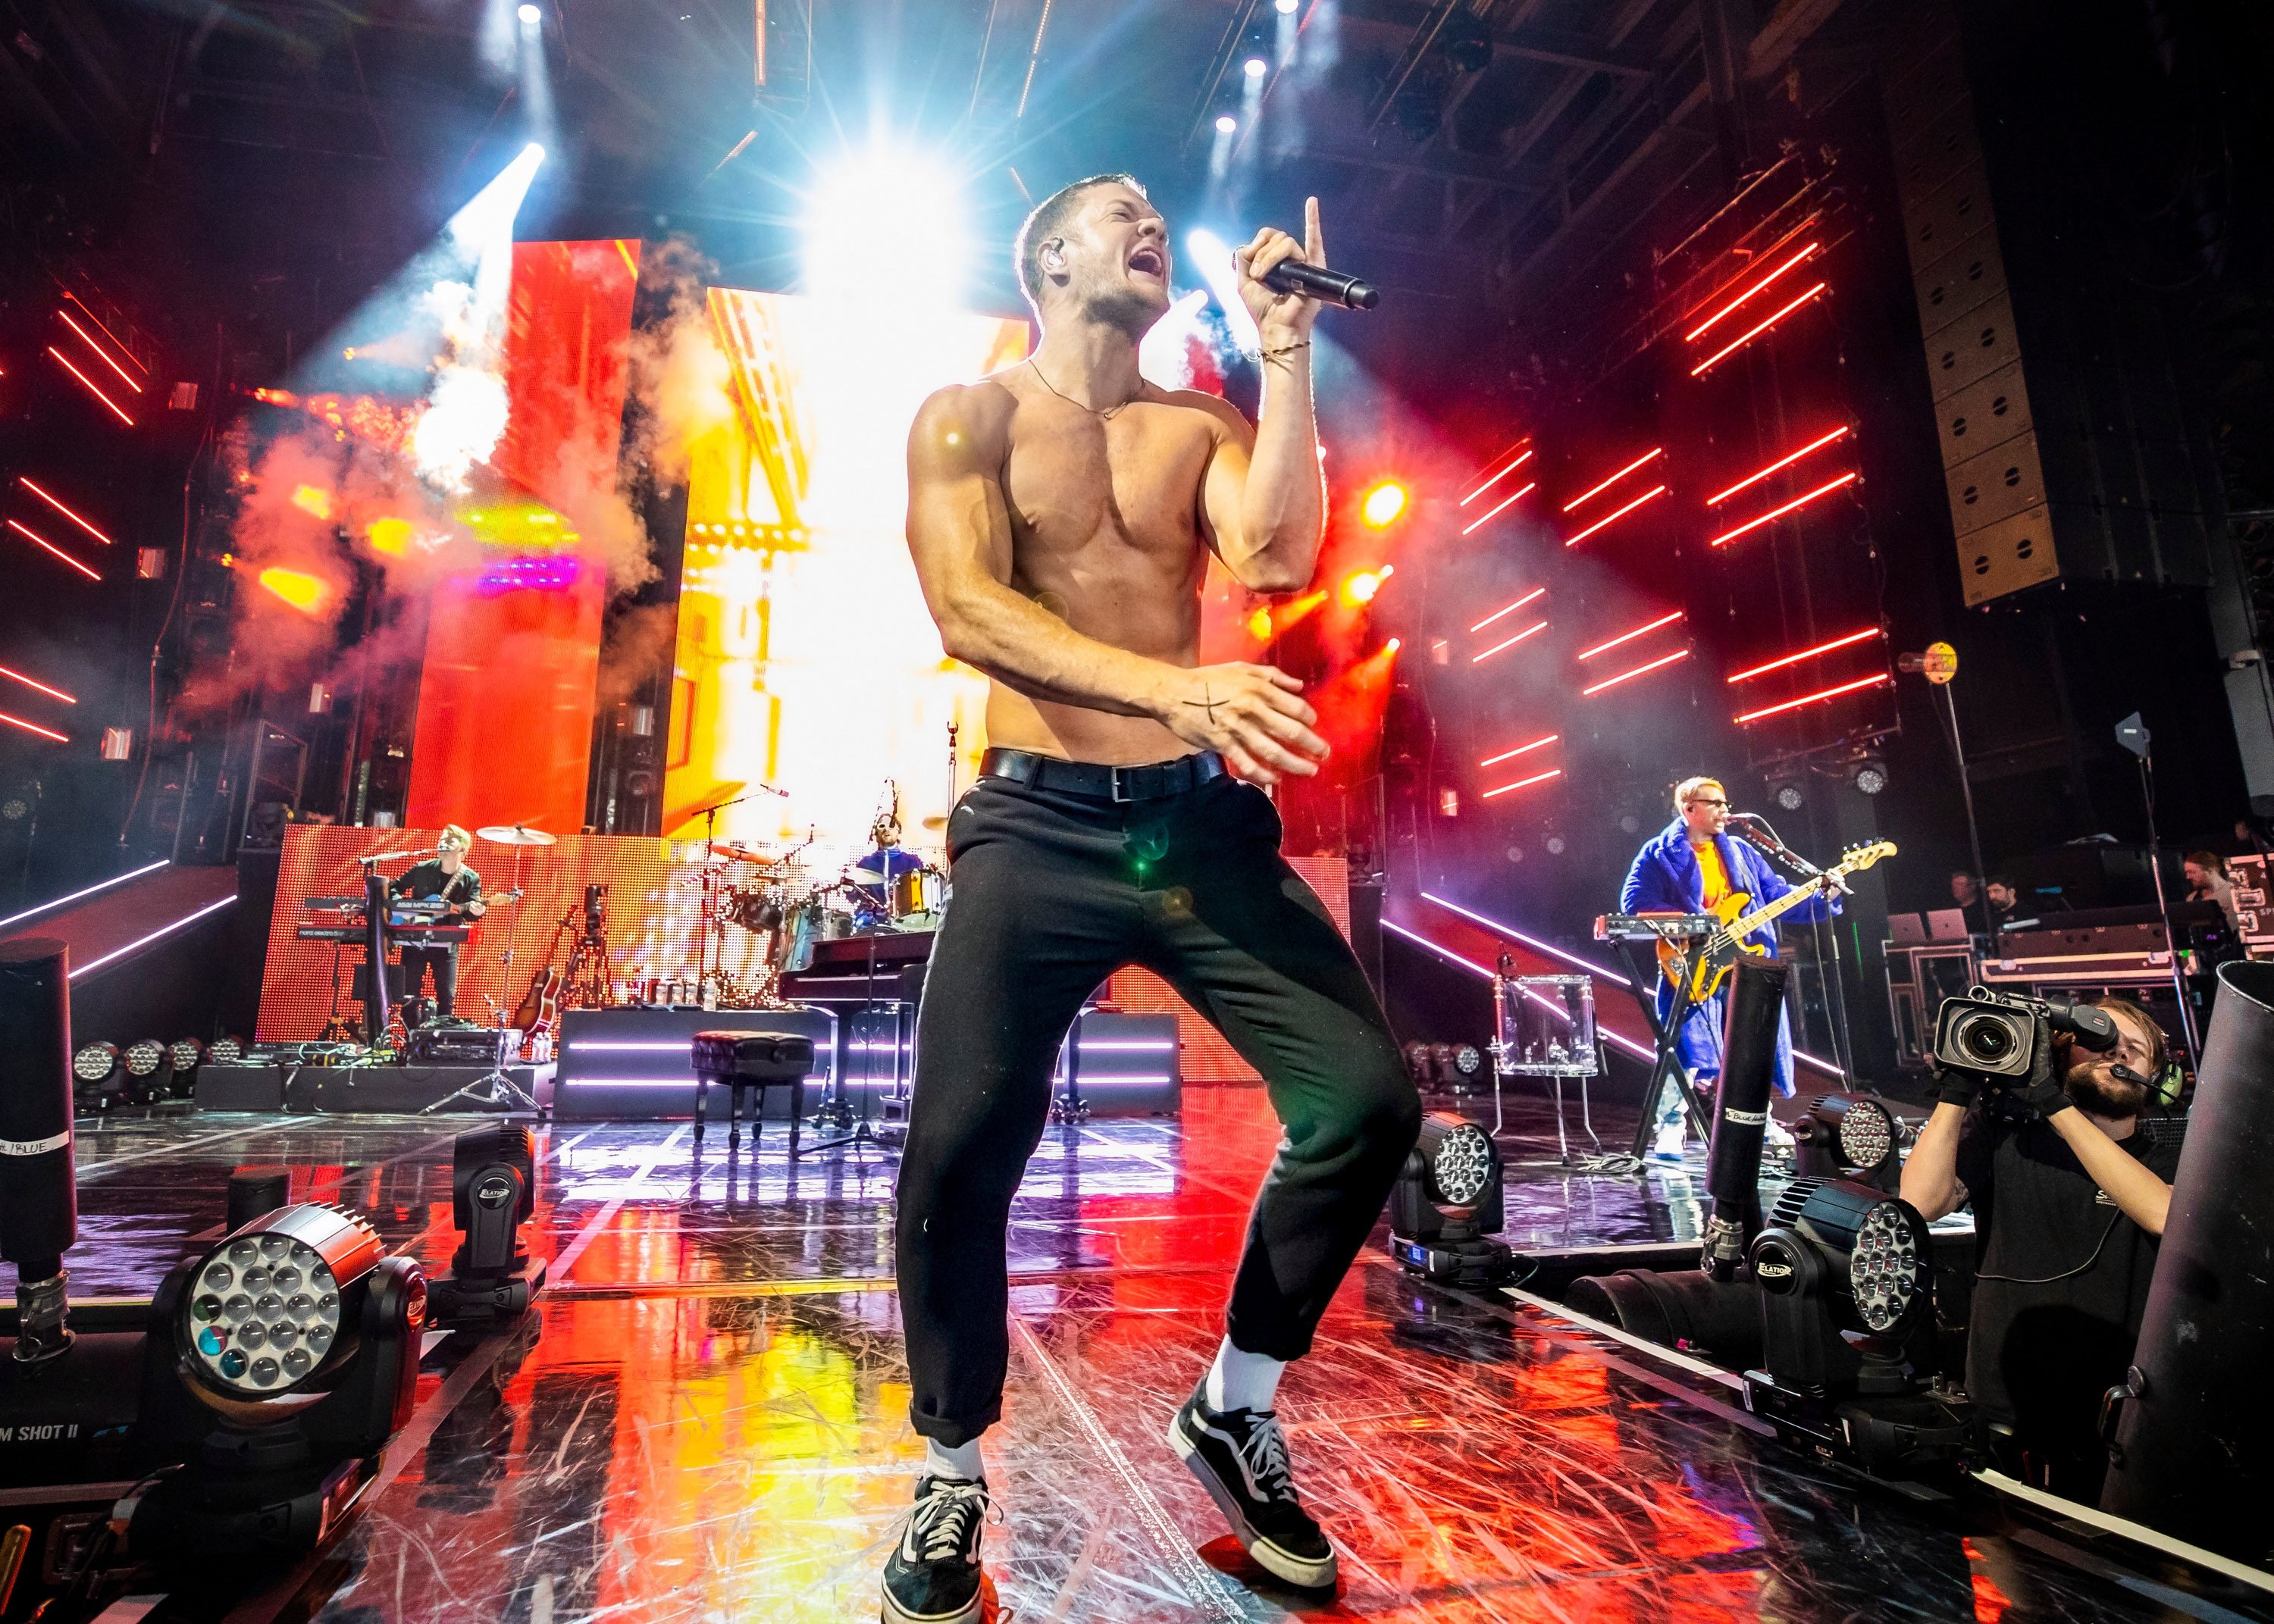 Imagine Dragons perform during their Evolve World Tour 2018 in Clarkston, Michigan.  Photo: Getty Images